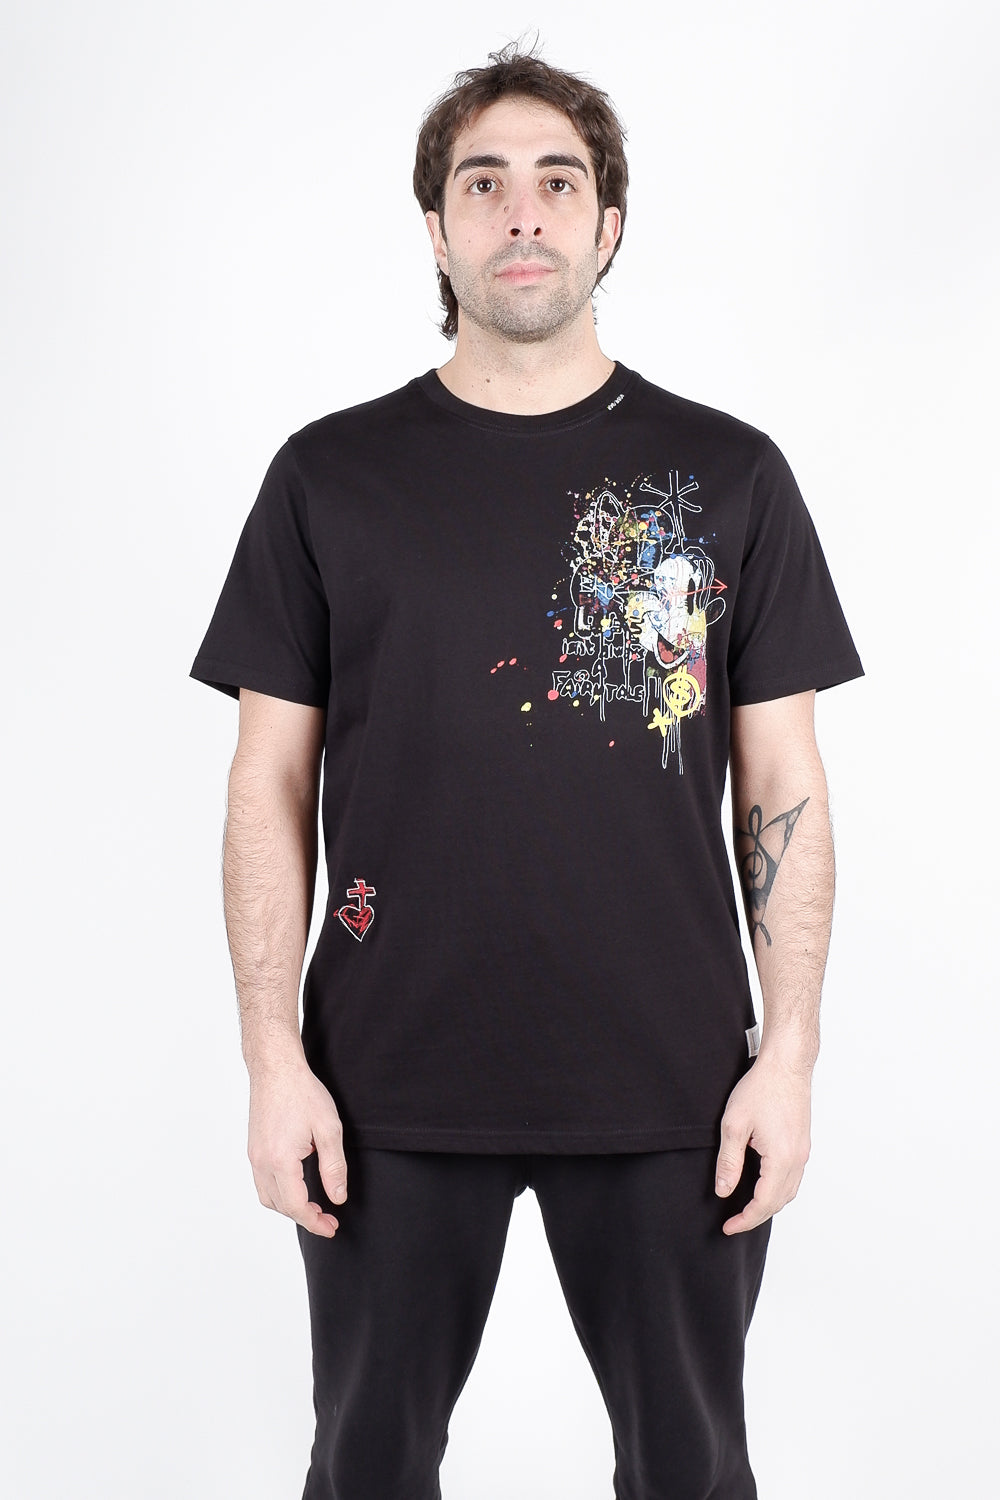 Buy the ABE Mickey T-Shirt in Black at Intro. Spend £50 for free UK delivery. Official stockists. We ship worldwide.